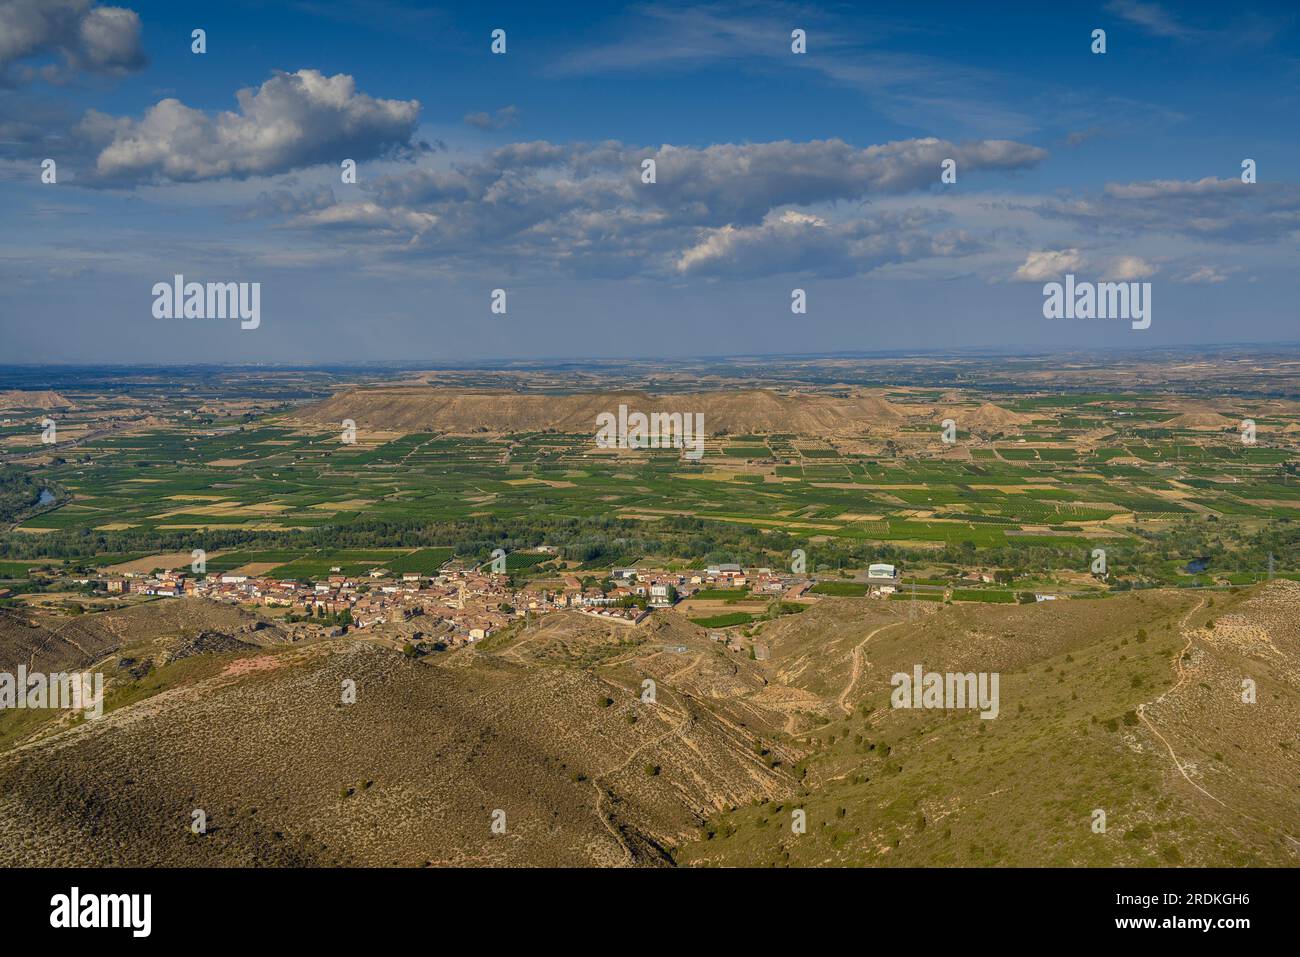 The town of Torrente de Cinca and its agricultural surroundings seen from the viewpoint of the hermitage monastery of San Salvador (Aragon, Spain) Stock Photo